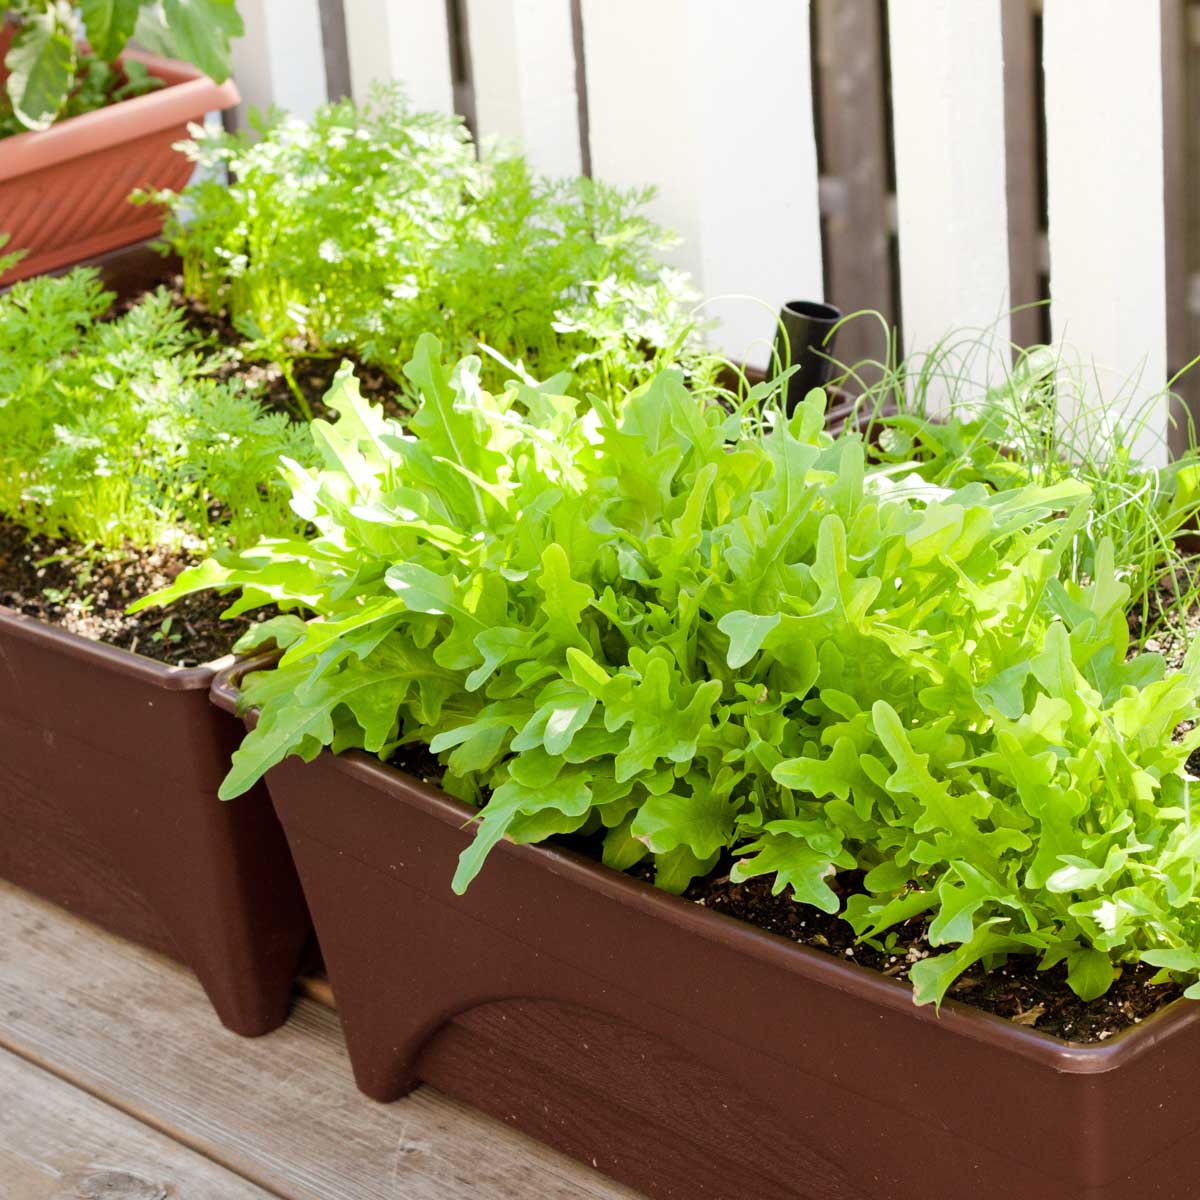 Vegetable Container Gardening Ideas: Tips for Beginners - Peanut Blossom